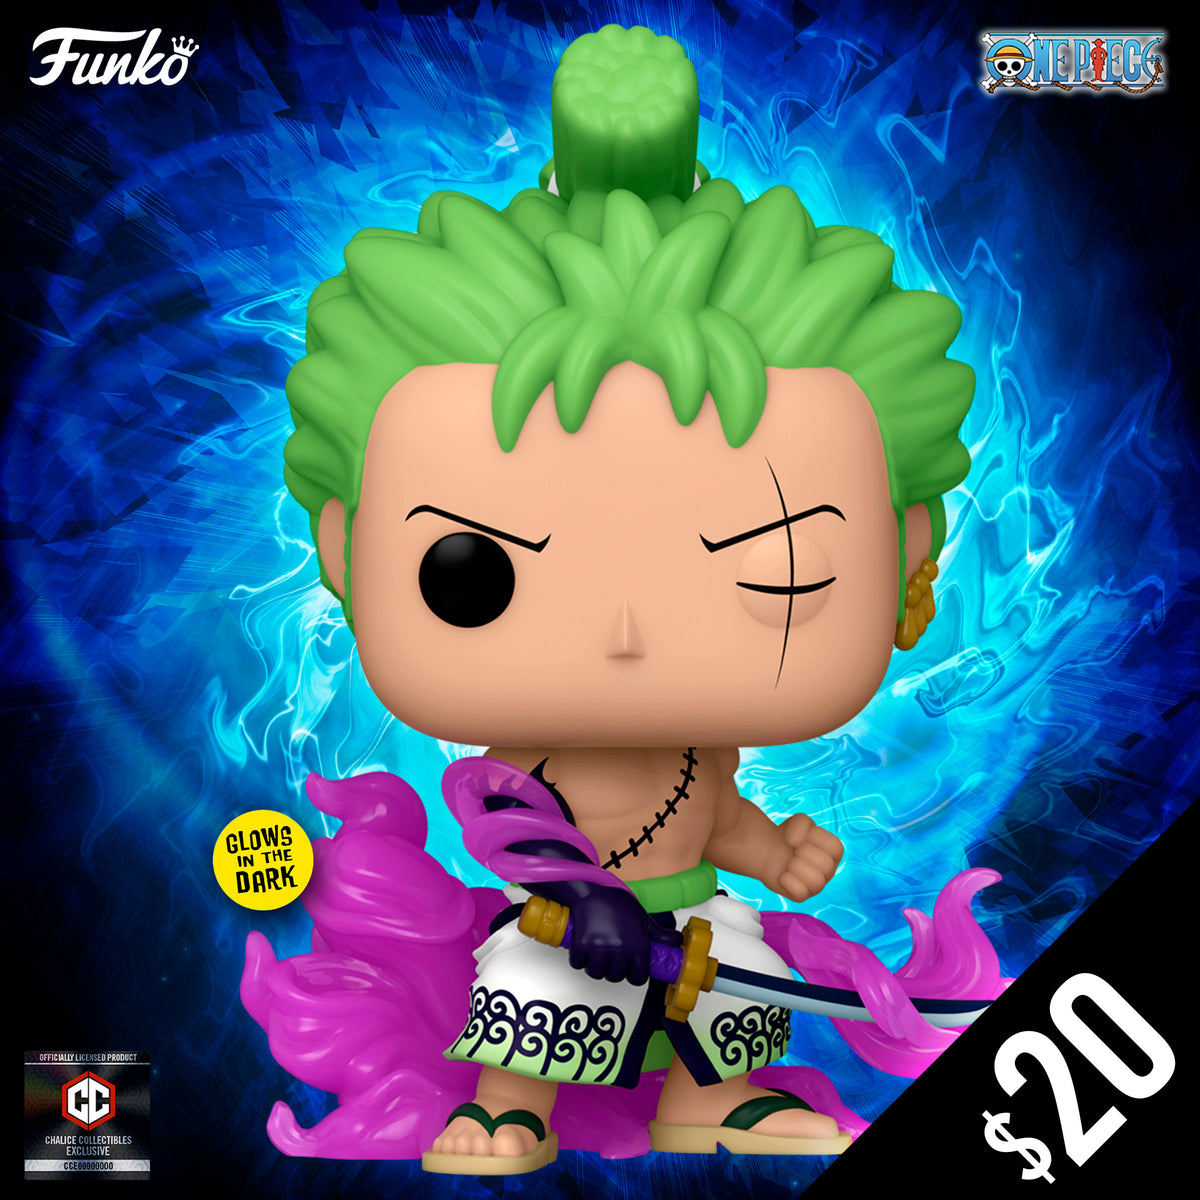 Zoro with enma. i think this one of the best One piece Funko pops. :  r/funkopop